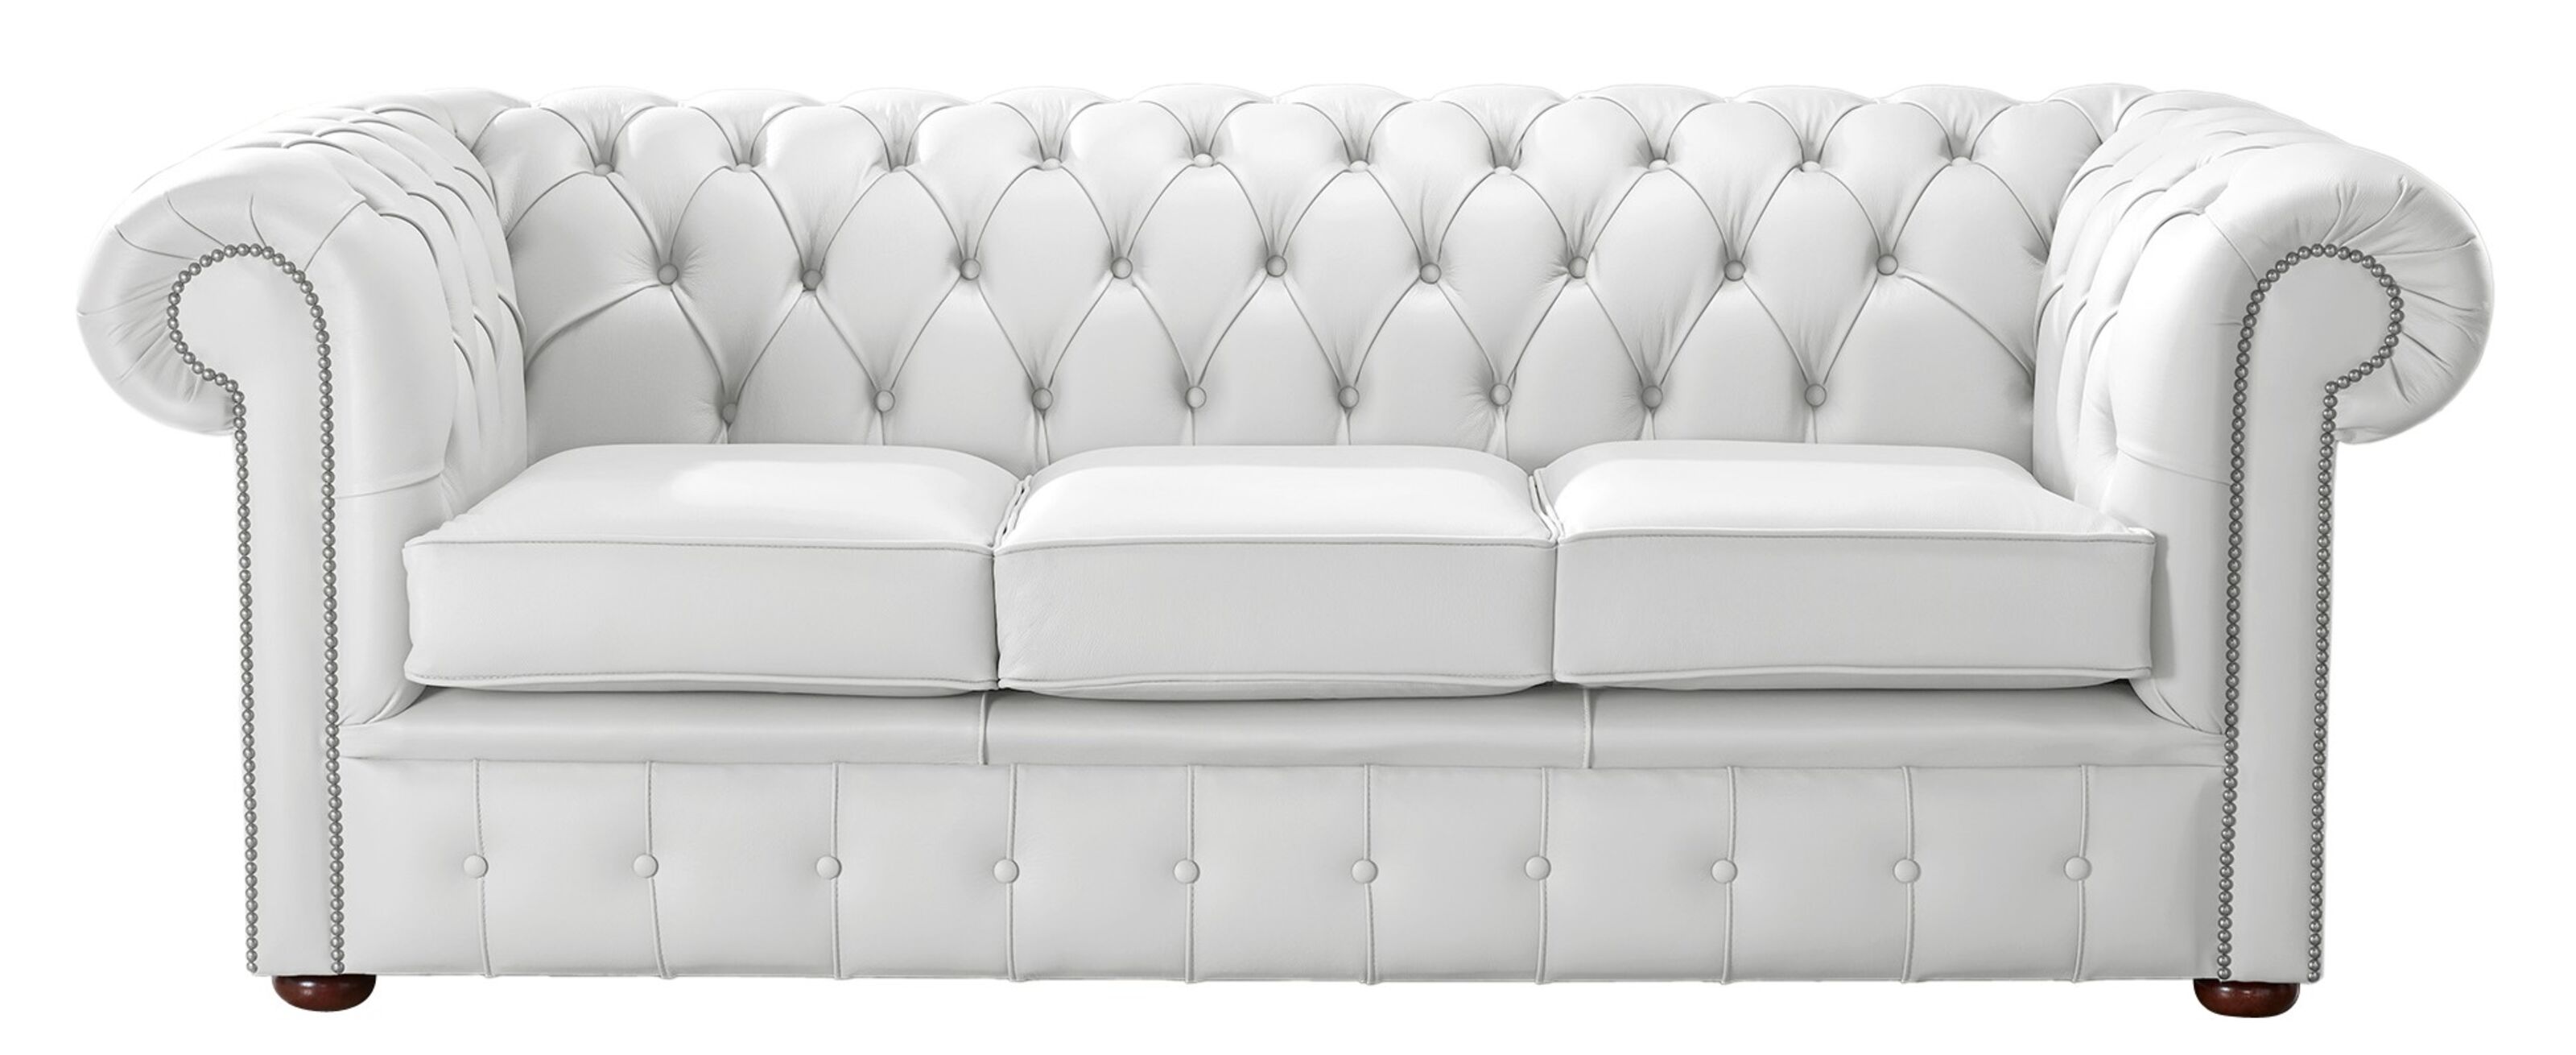 Chesterfield Sofas of England - Where Quality Meets Tradition  %Post Title